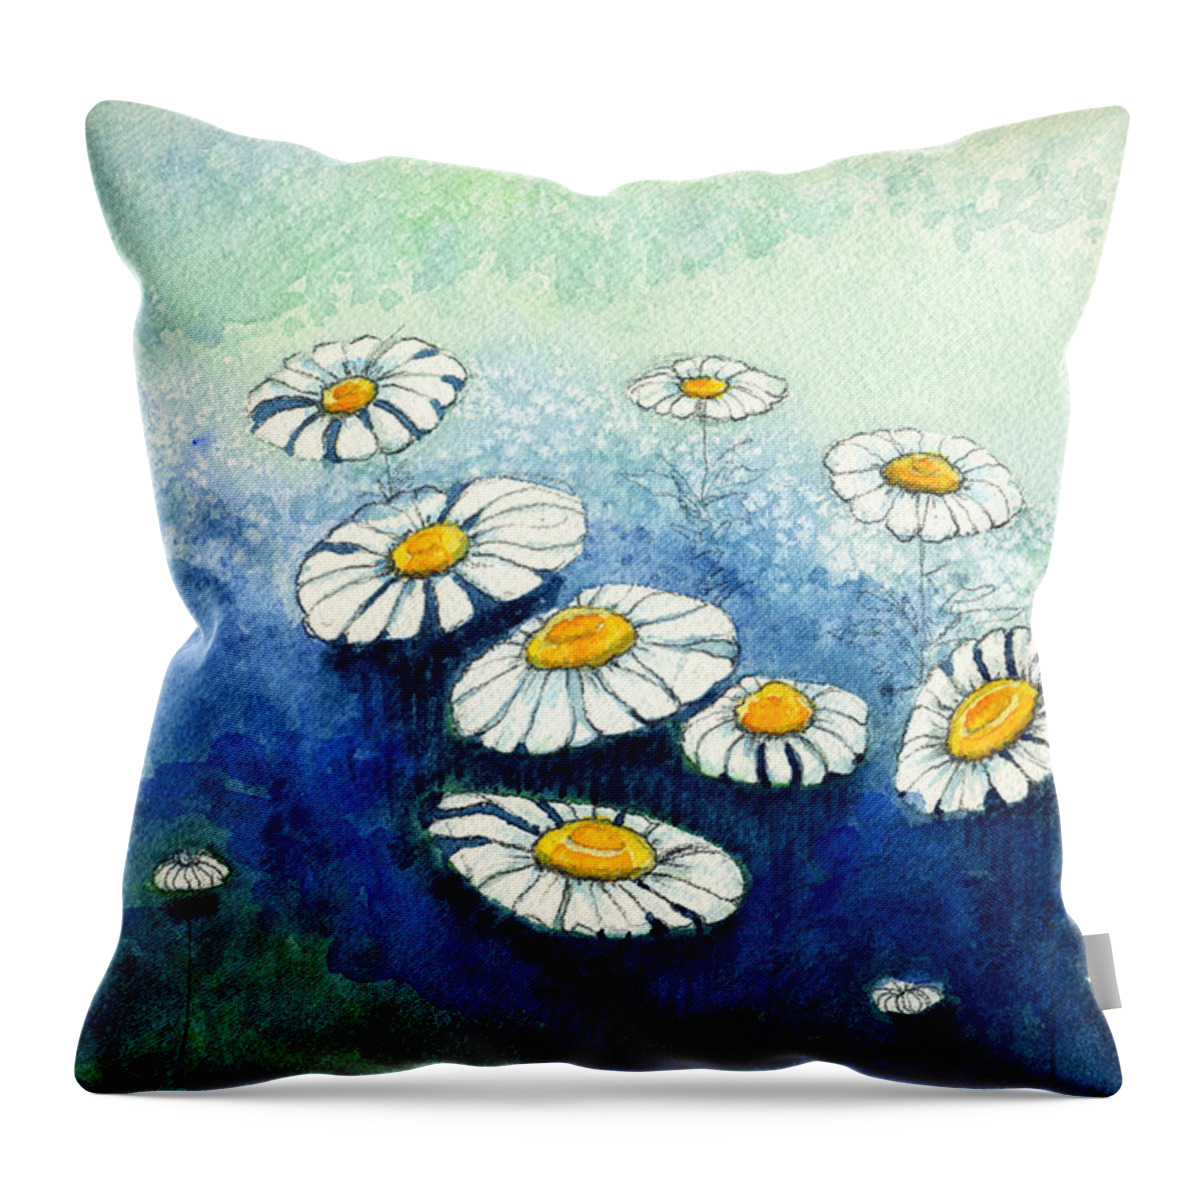 Indigo Throw Pillow featuring the painting Rainy Daisies by Katherine Miller